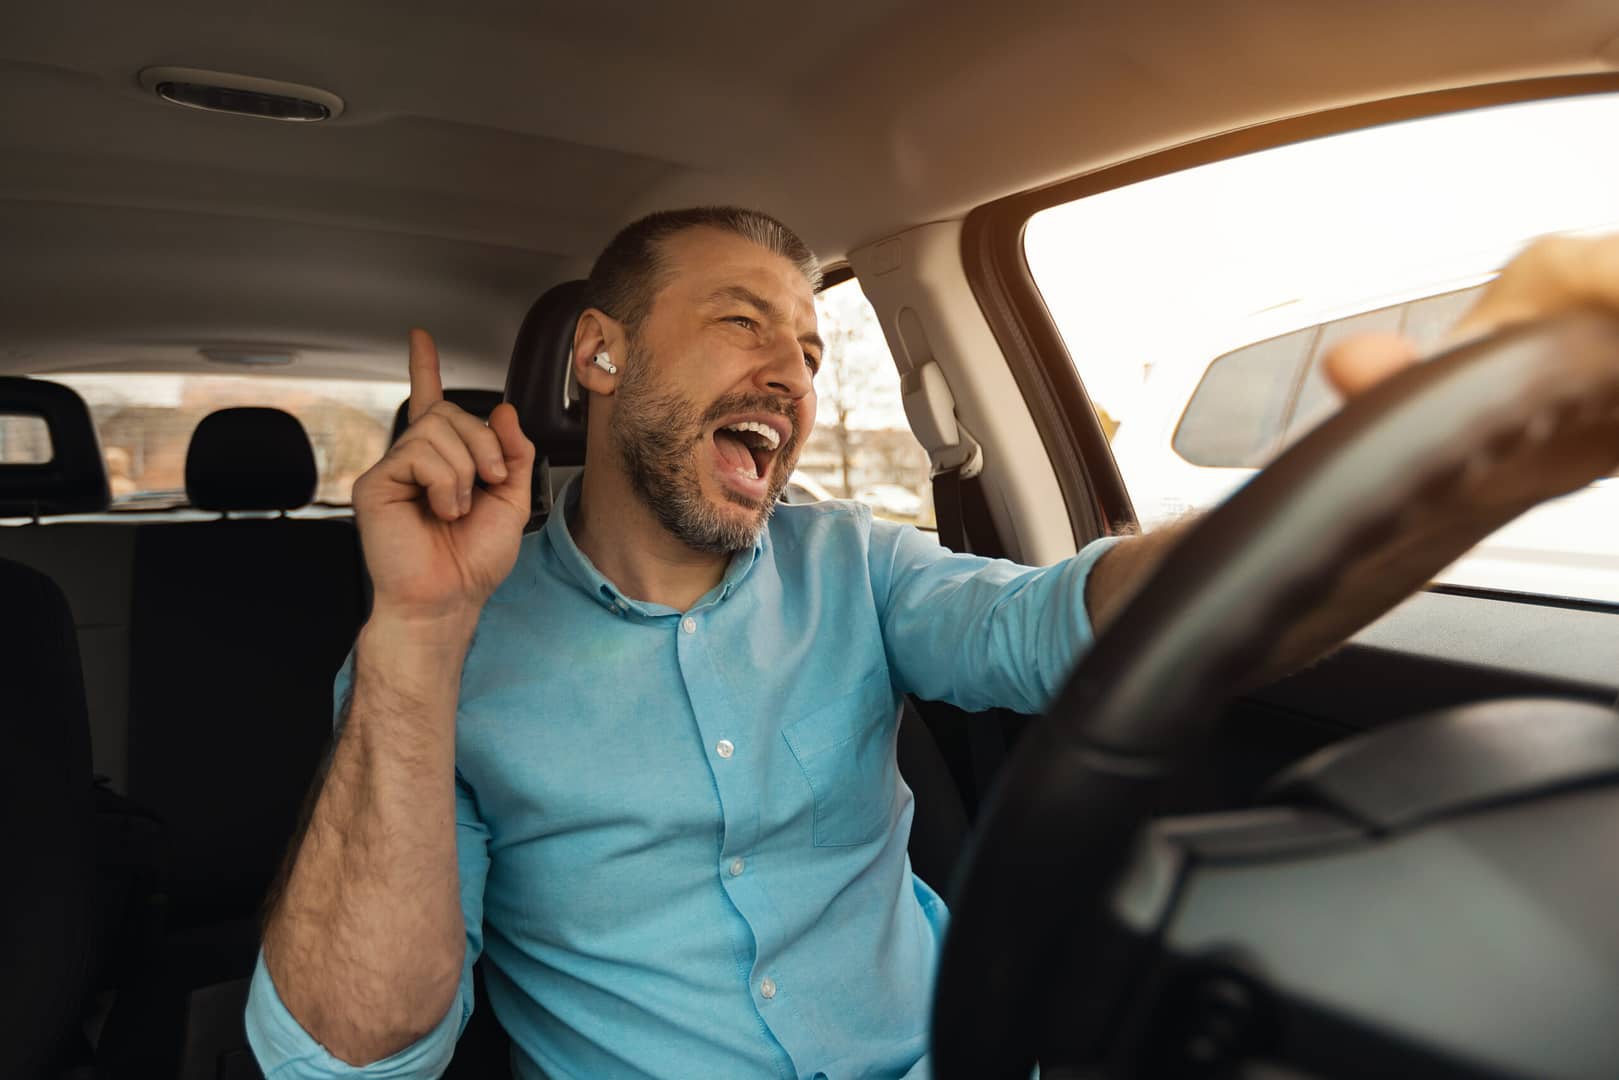 Man driving a car with wireless earphones